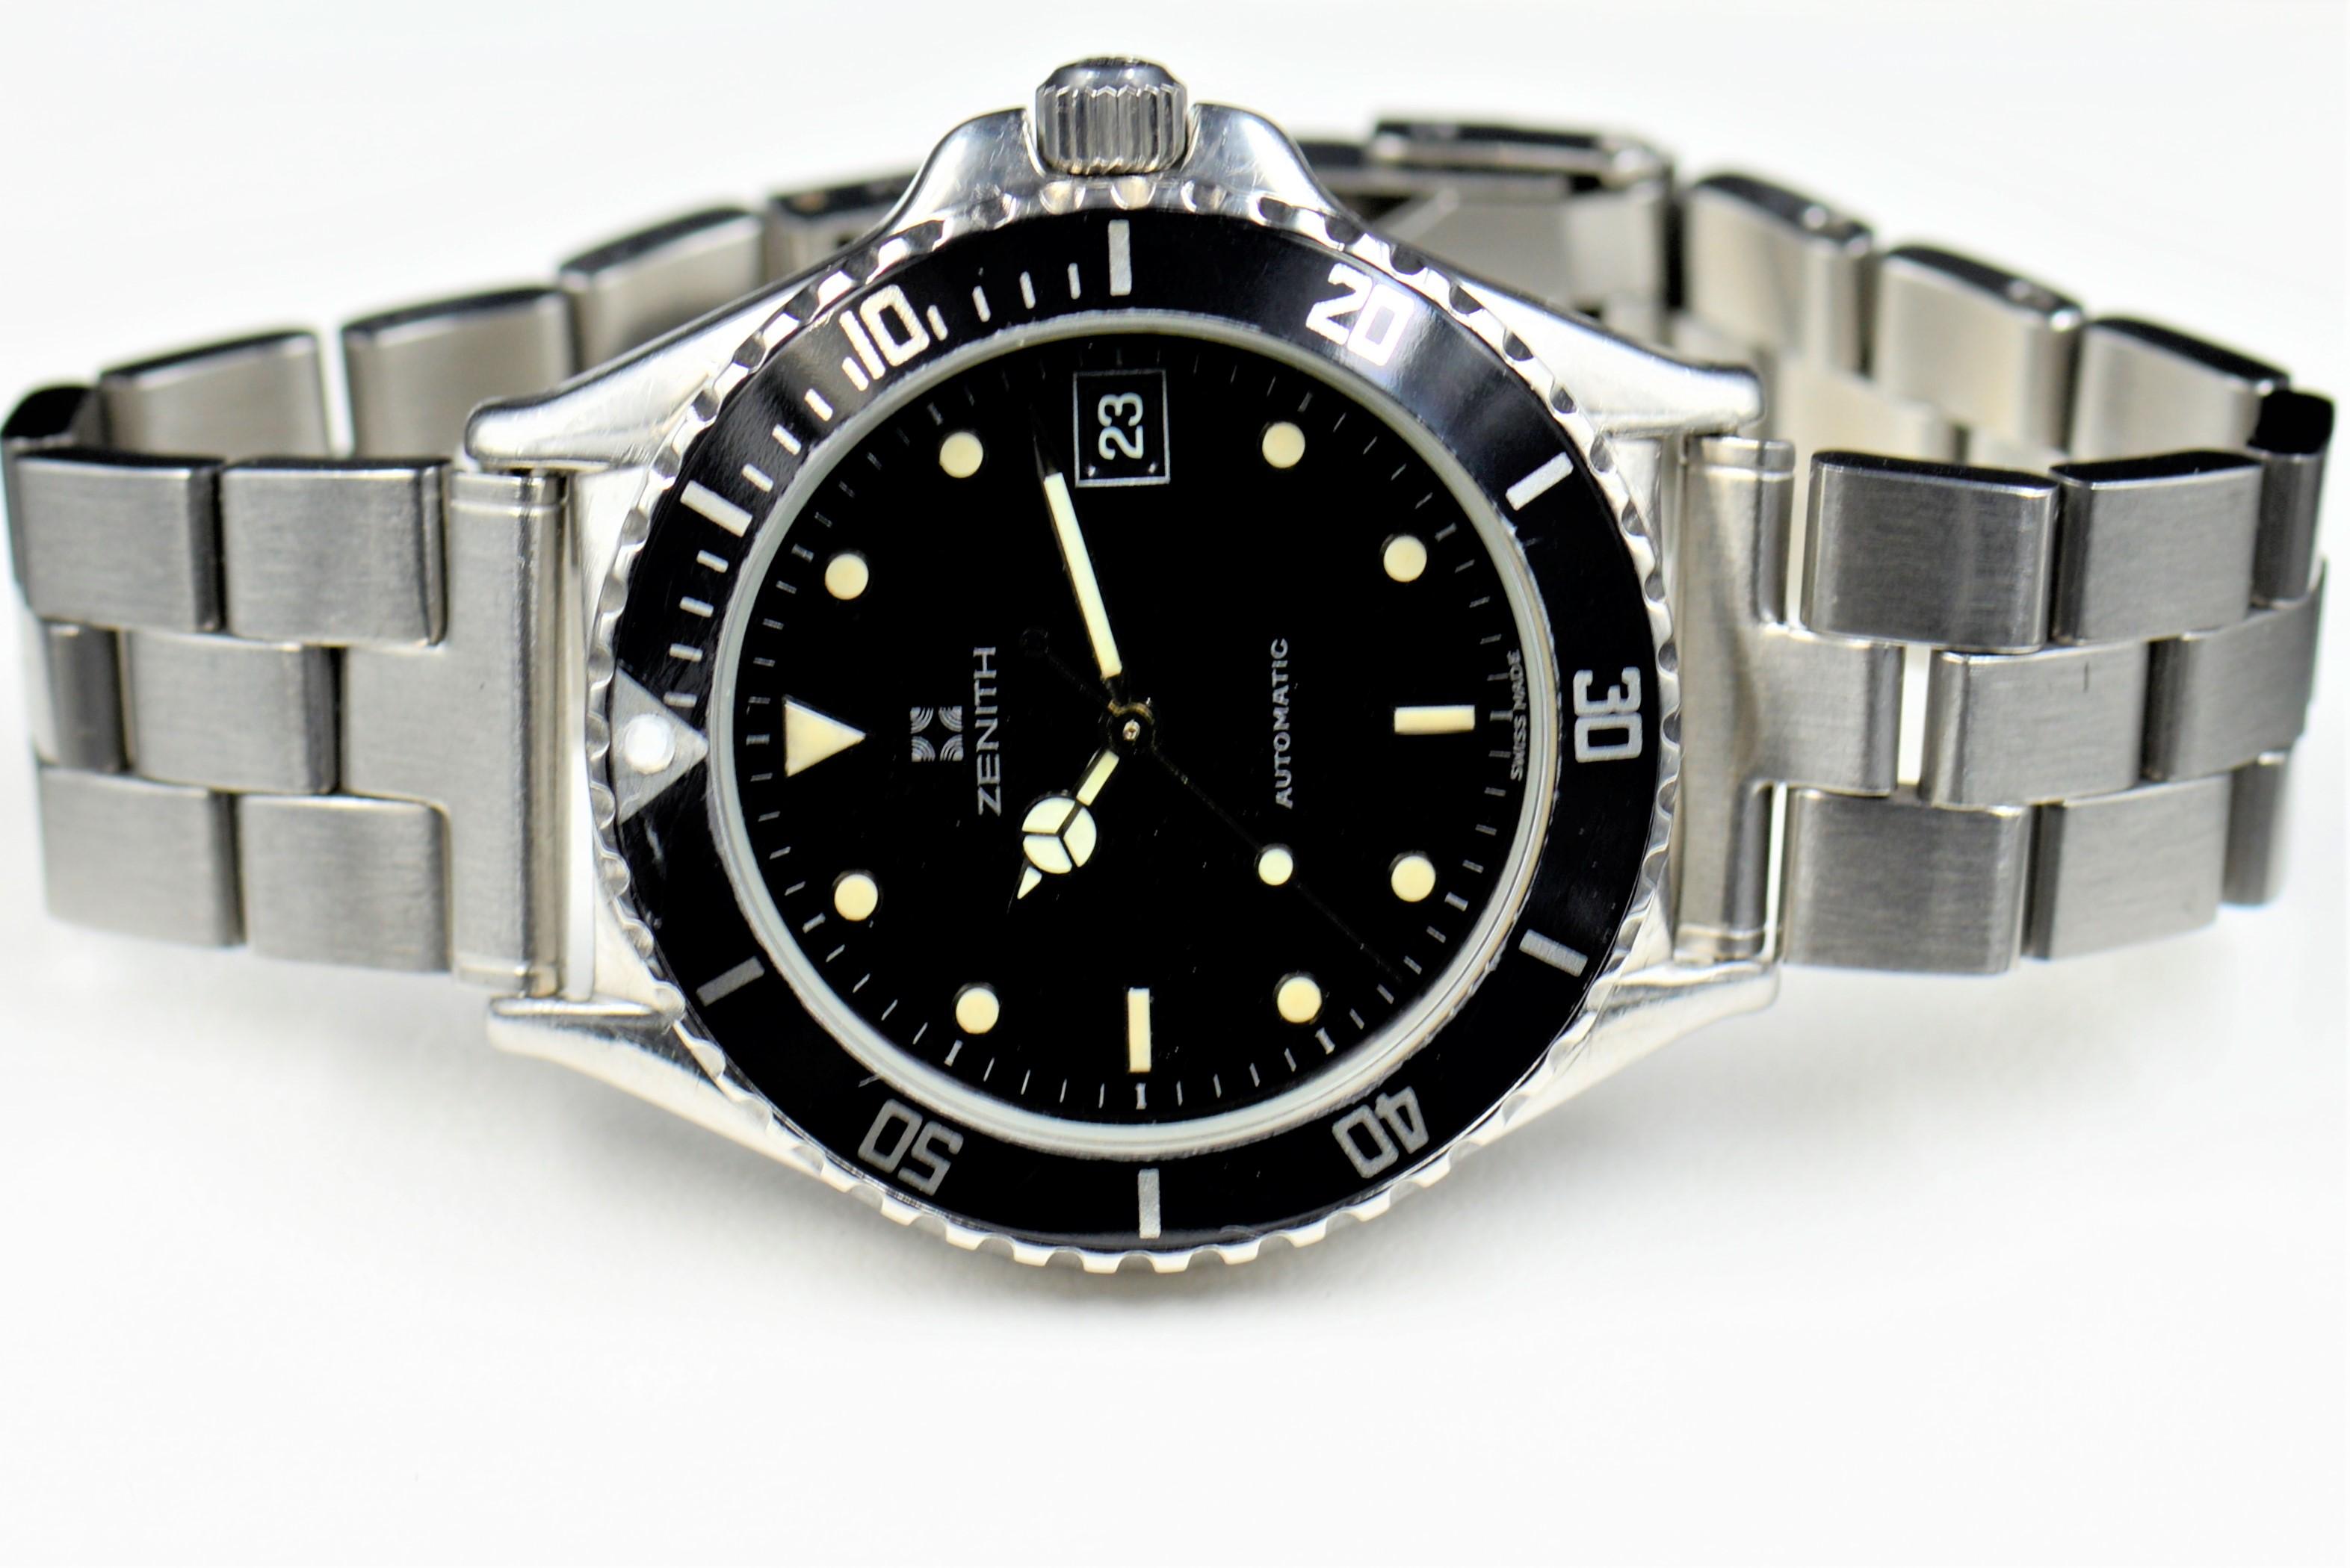 WTS]Zenith Diver Automatic Submariner 